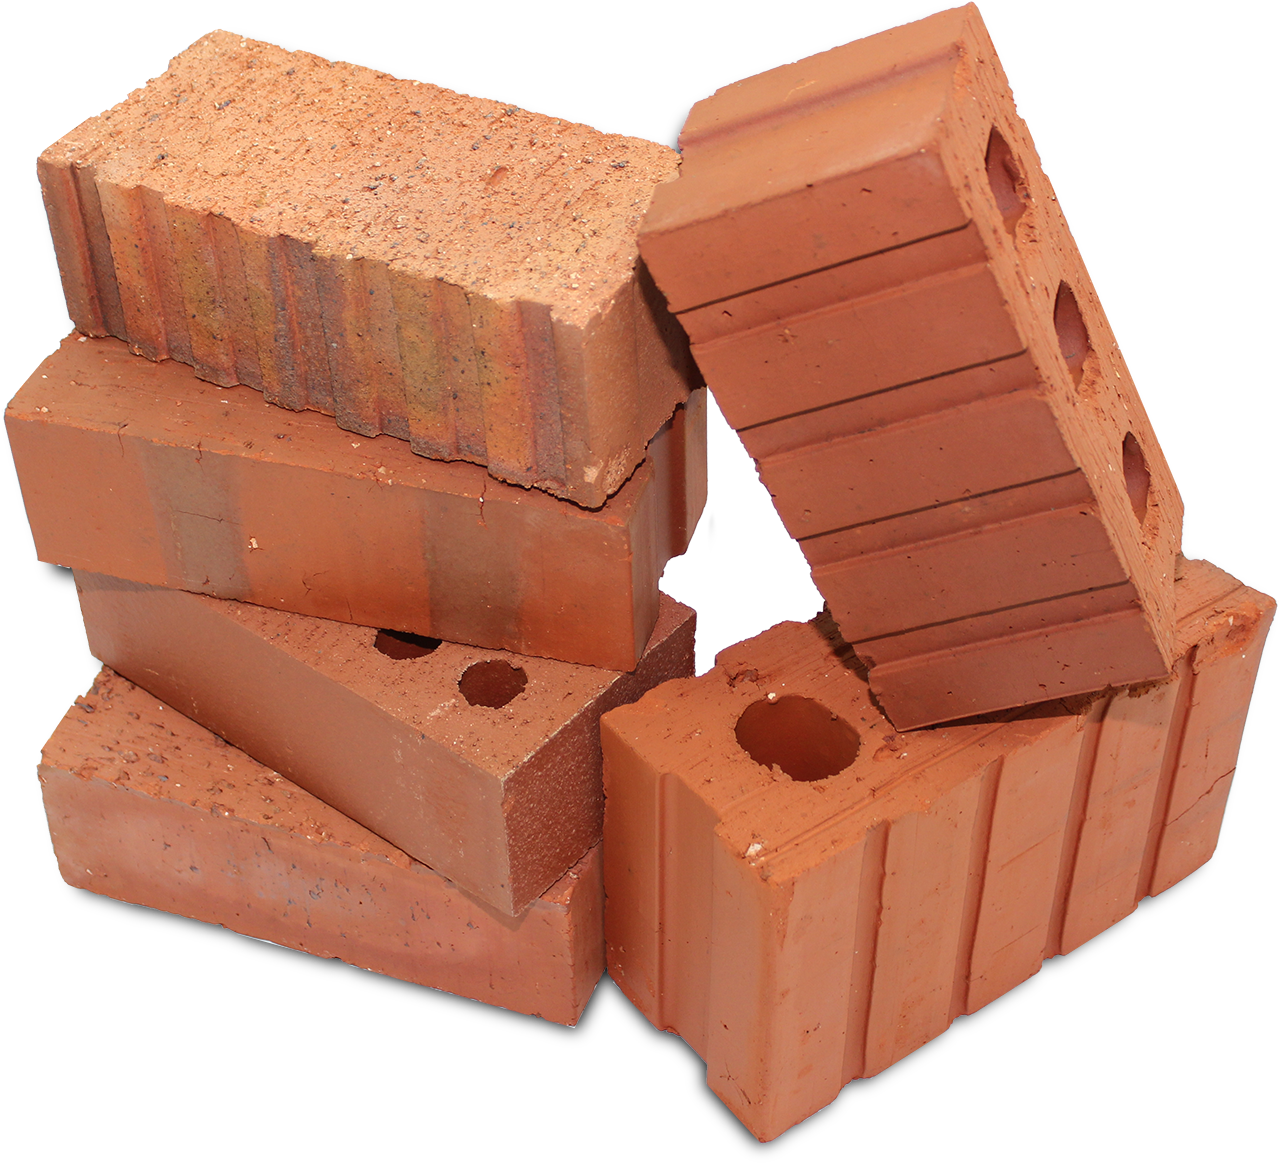 A Stack Of Bricks With Holes